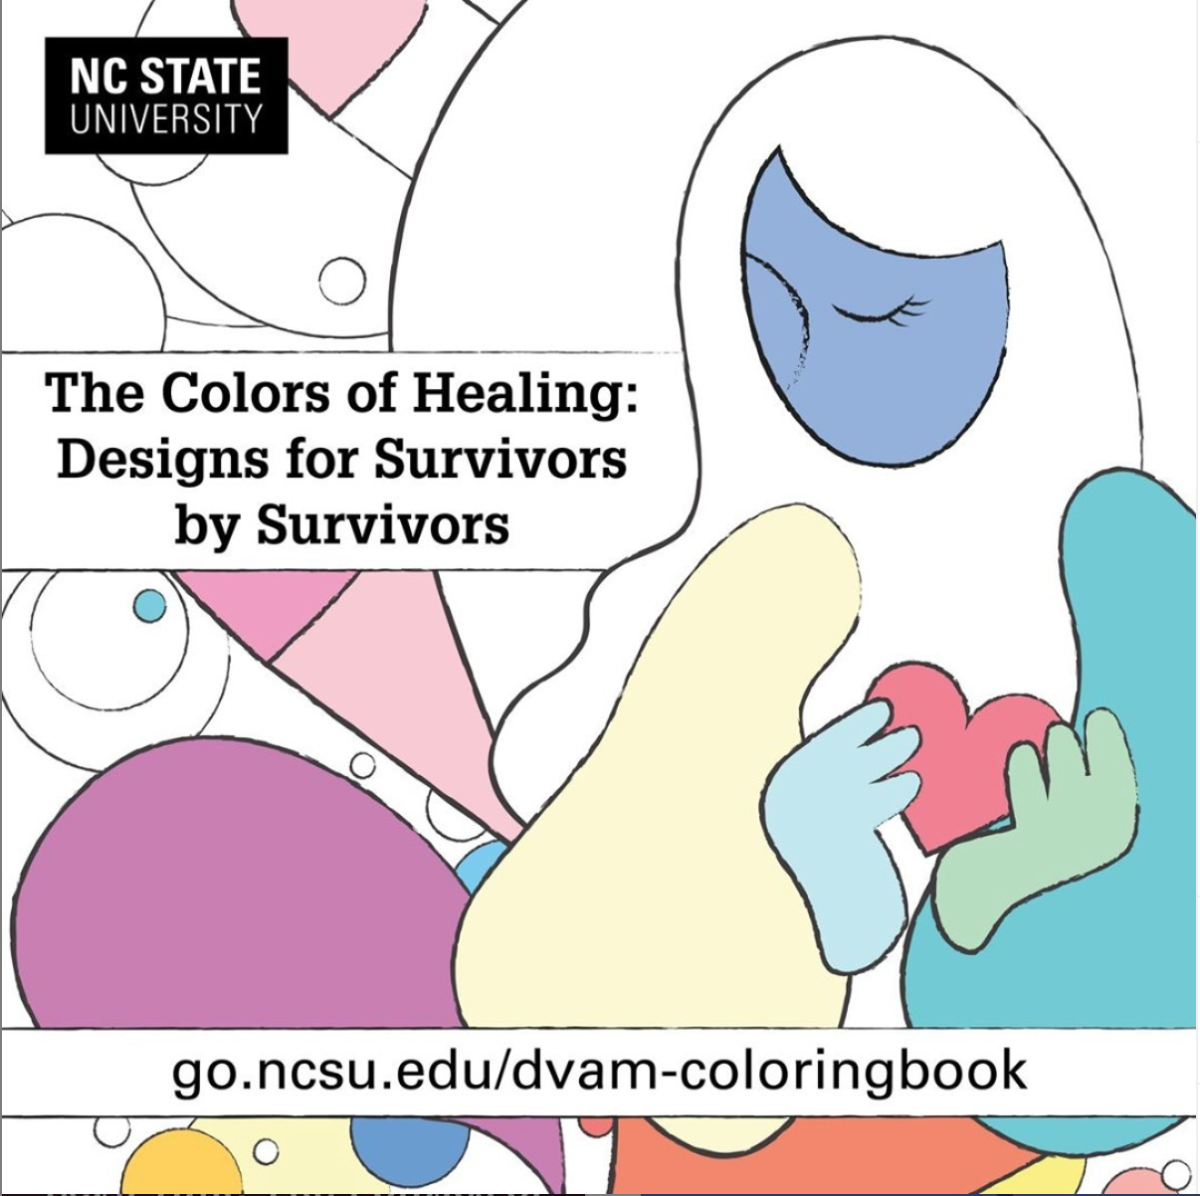 The Colors of Healing, Designs for Survivors, by Survivors